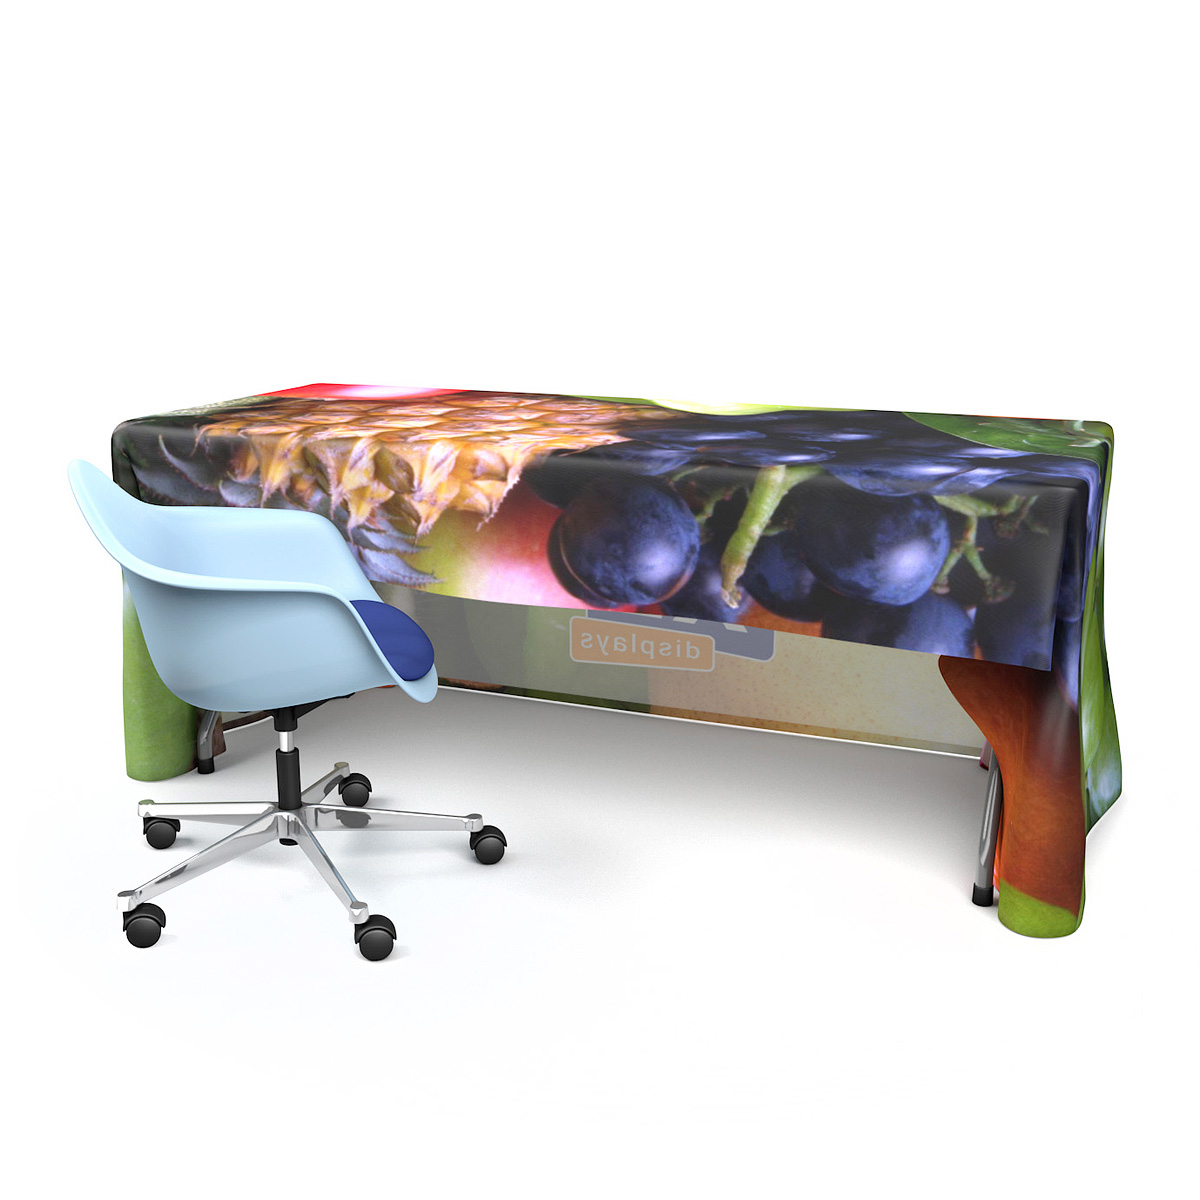 All Over Print Dye Sublimation Printed Tablecloths